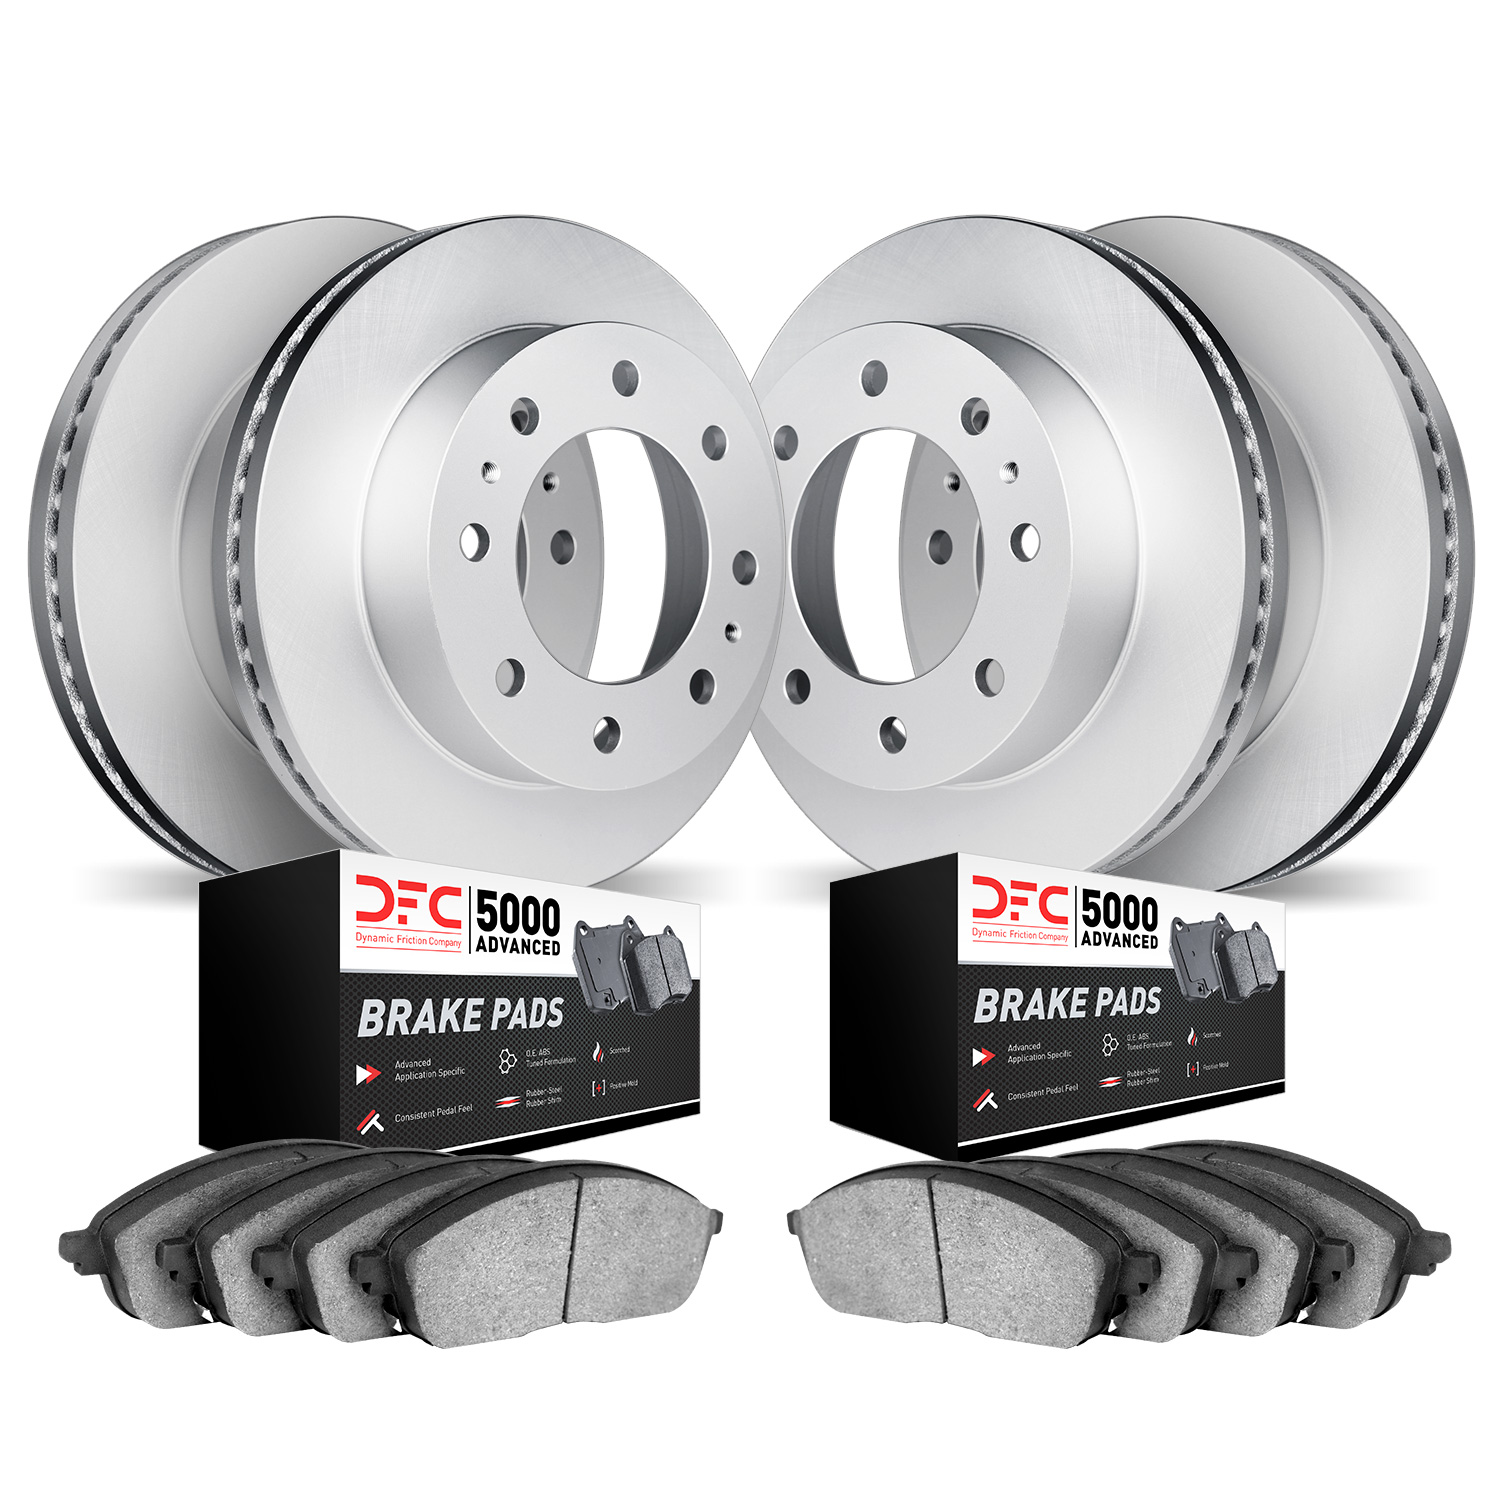 4504-48015 Geospec Brake Rotors w/5000 Advanced Brake Pads Kit, 2001-2010 GM, Position: Front and Rear